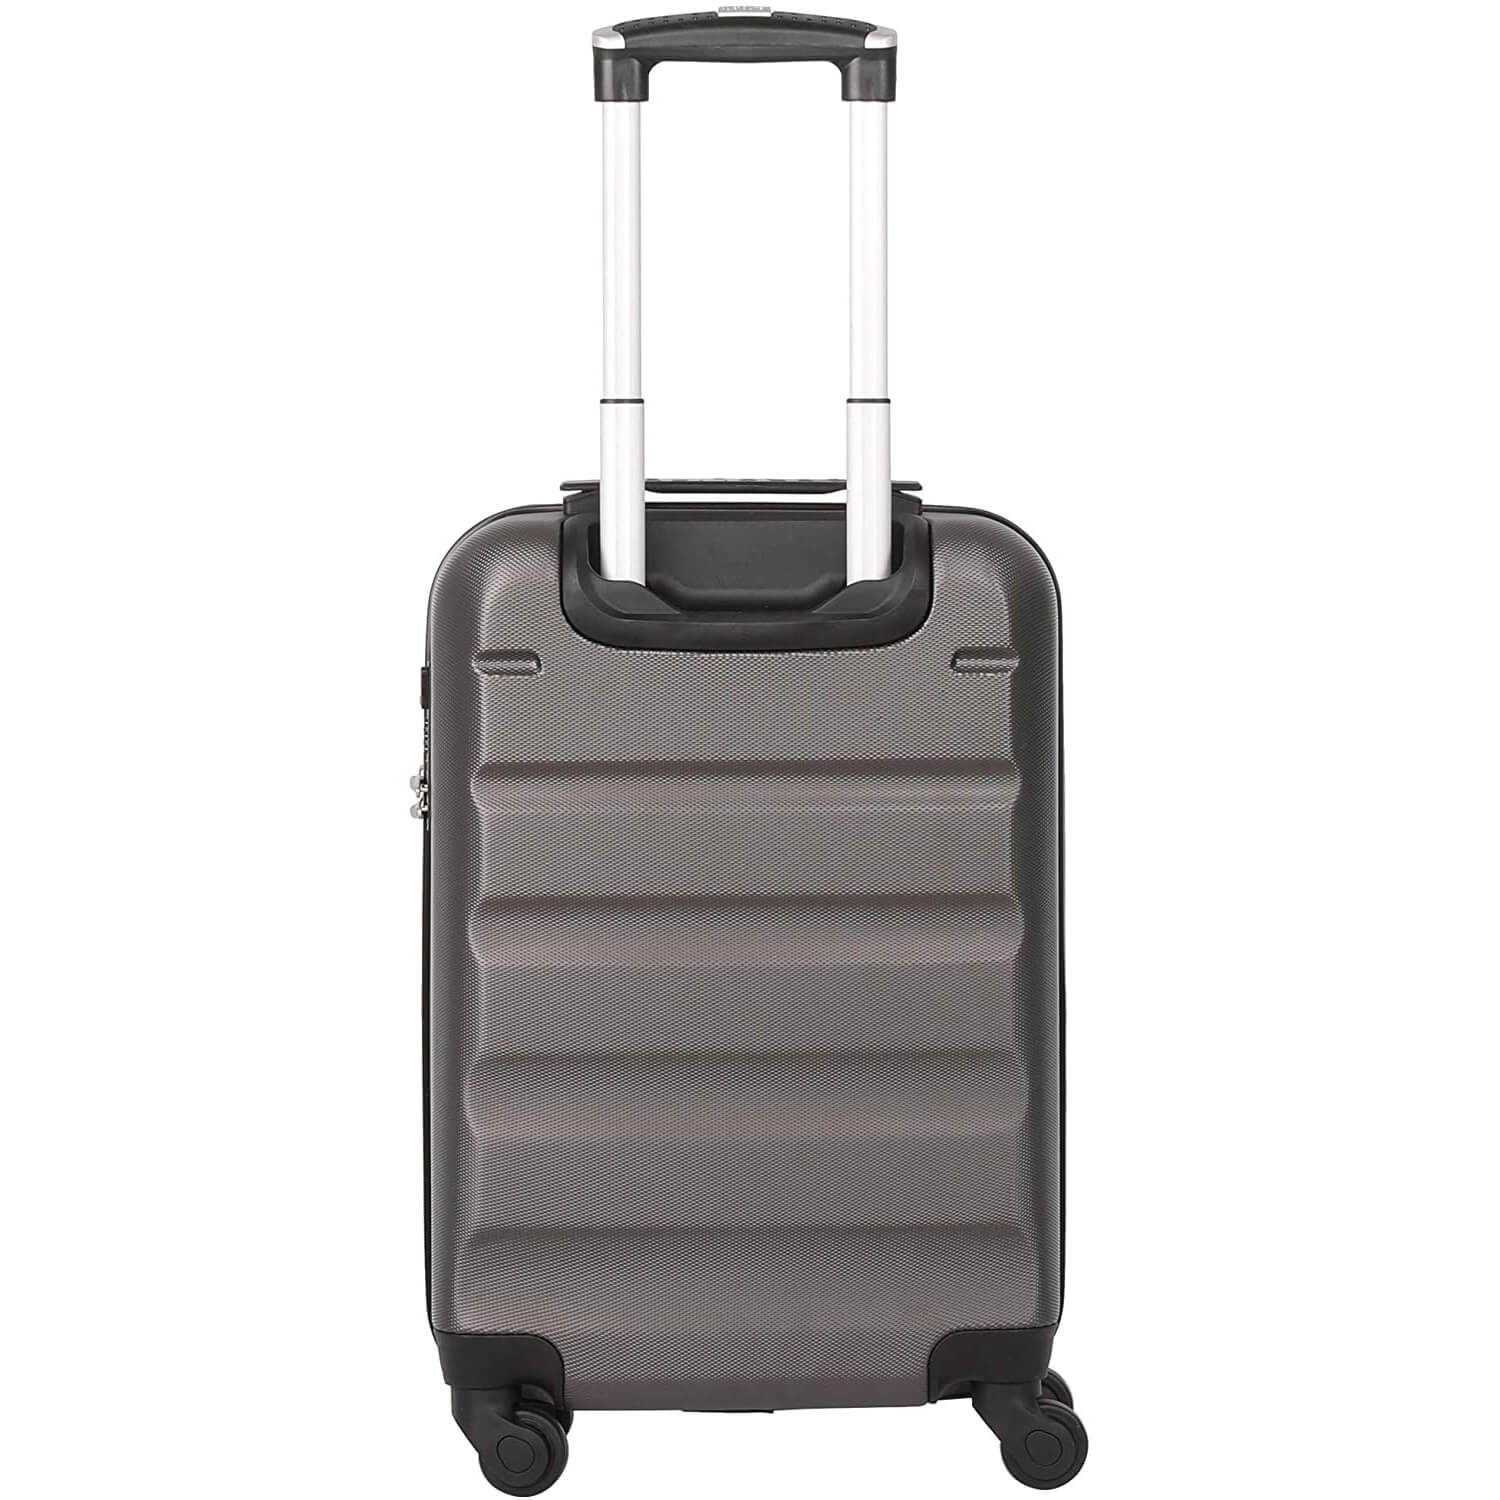 Aerolite 3 Piece Lightweight 4 Wheel ABS Hard Shell Luggage Suitcase Set with Built in TSA Combination Lock, 2 x 21" Cabin + 1x Large 29", Charcoal